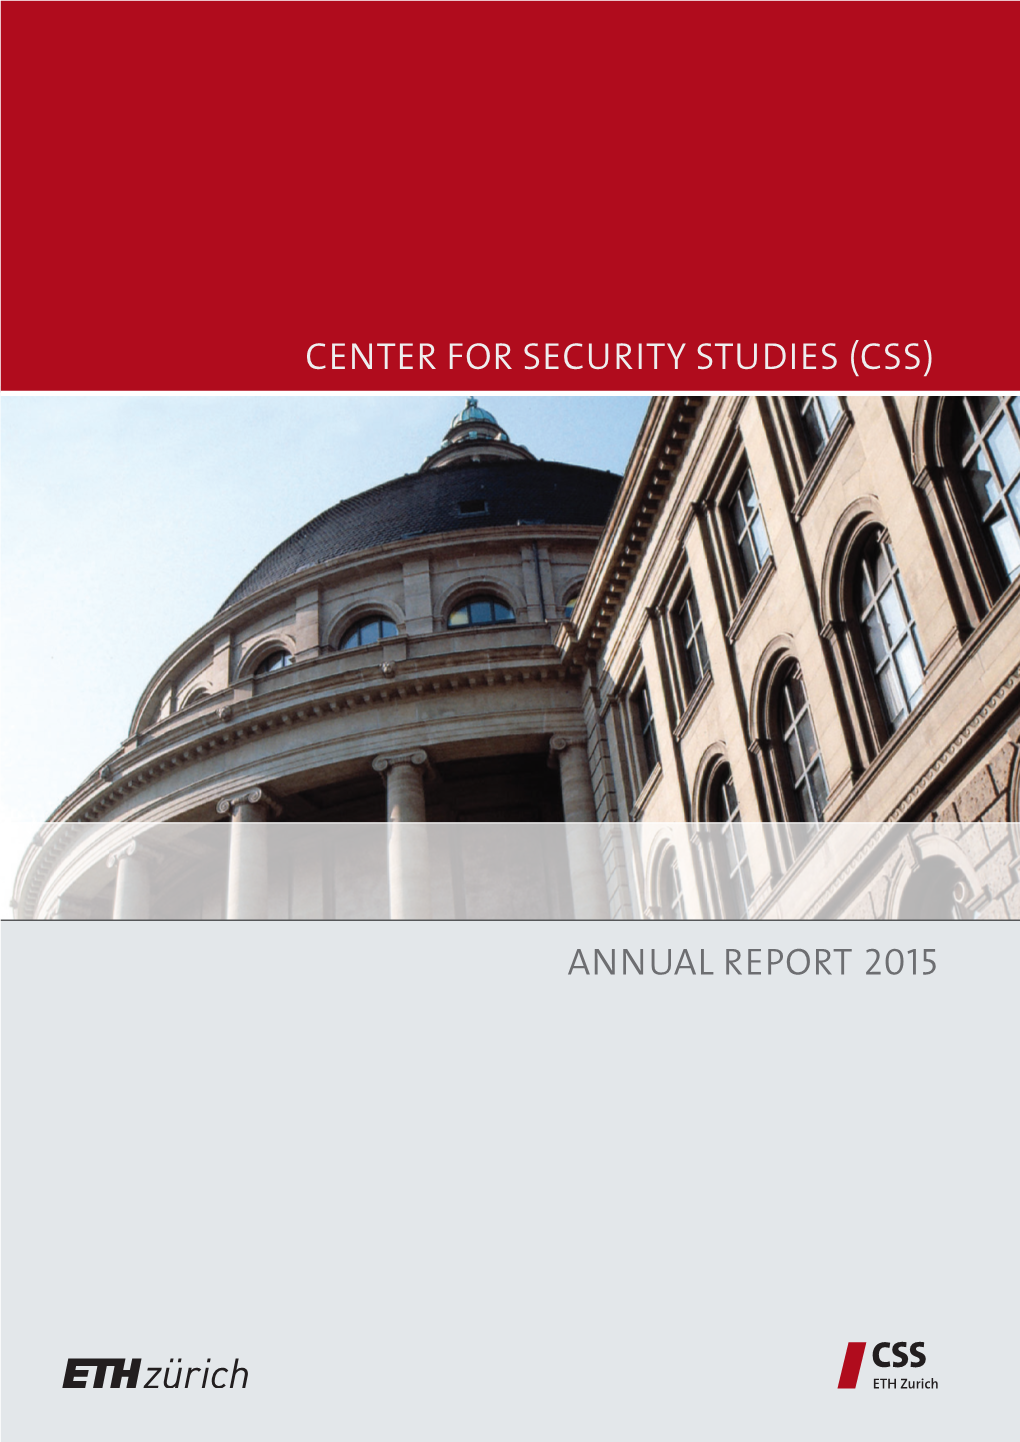 Center for Security Studies (Css) Annual Report 2015